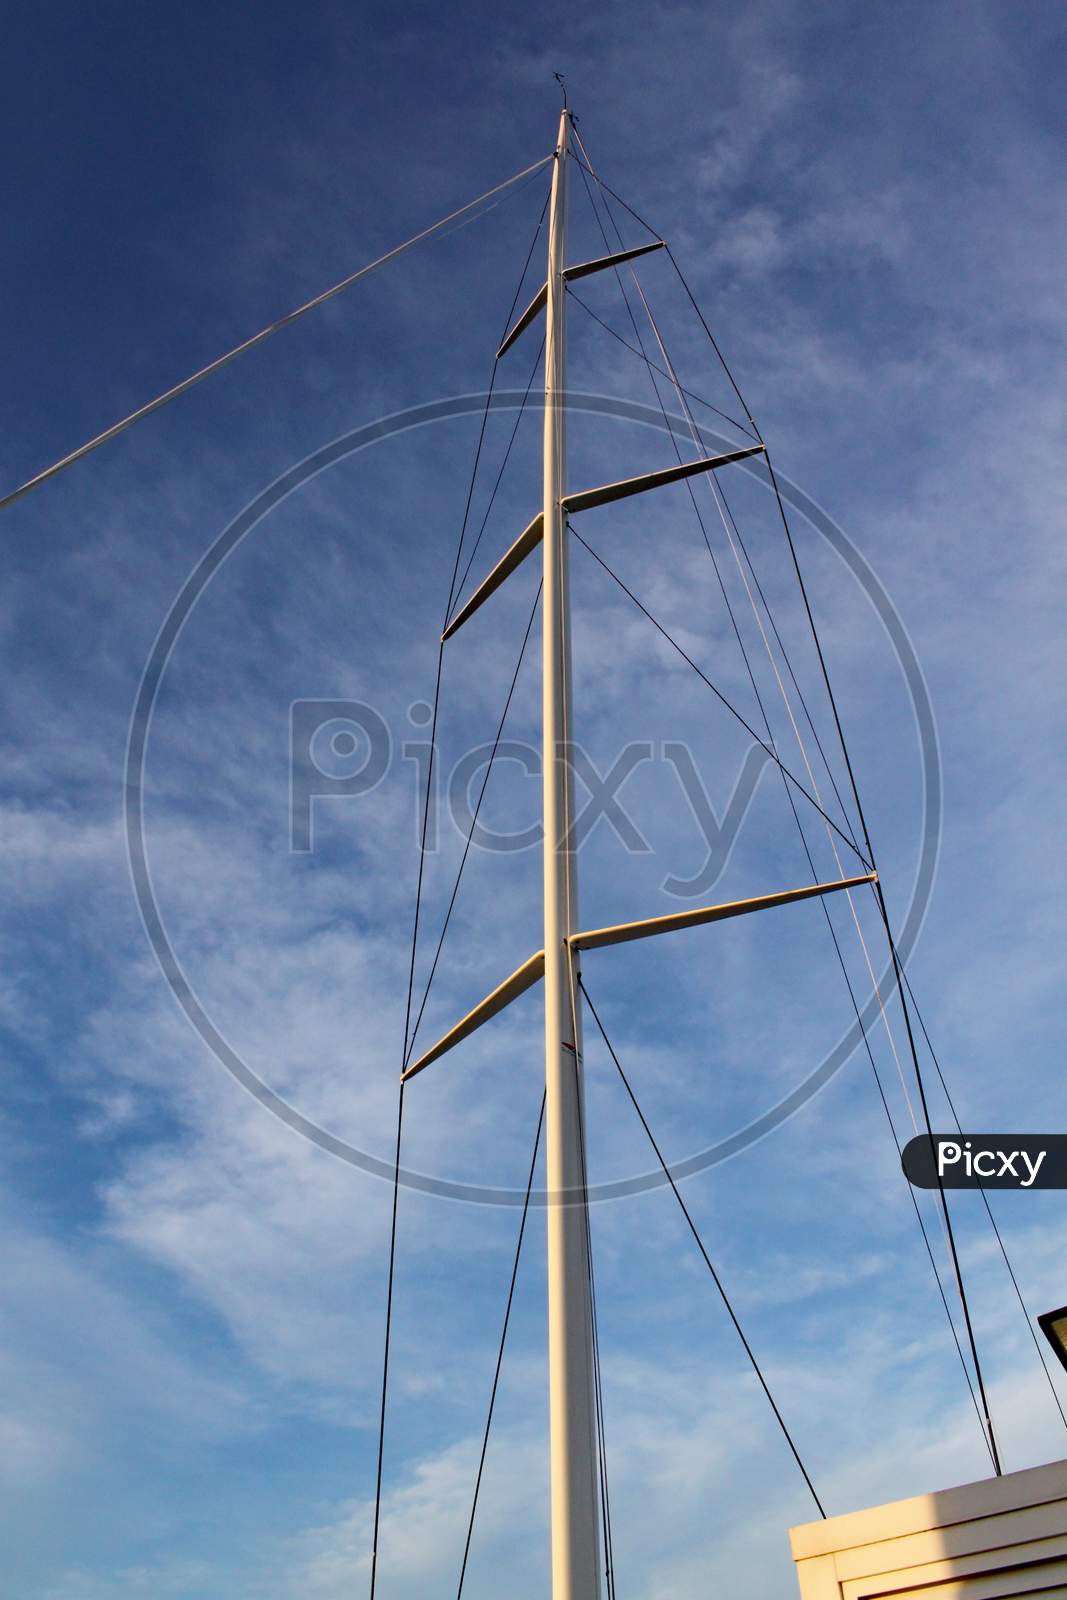 The Mast And Rigging Of A Racing Yacht Stands Out Against The Clear Blue Sky.